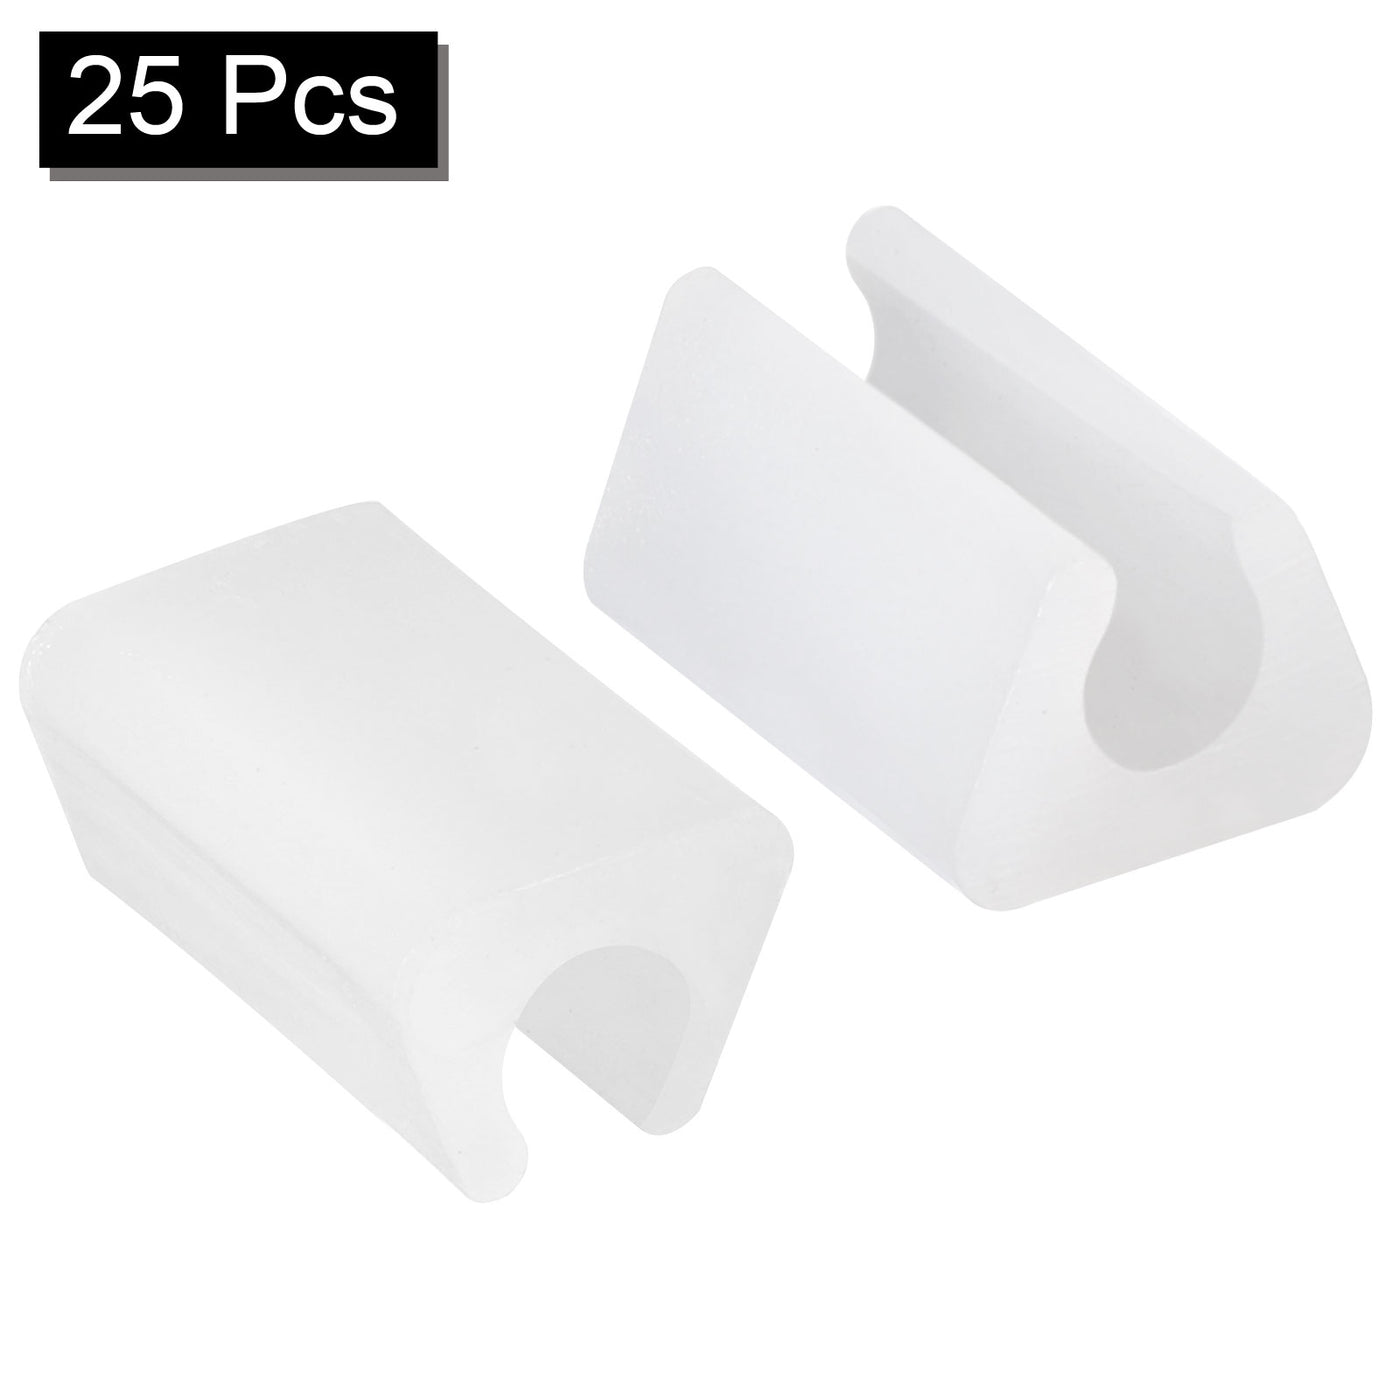 uxcell Uxcell 25Pcs Rectangle Shaped Non-Slip Chair Leg Tip 6-7mm Plastic Furniture Feet White